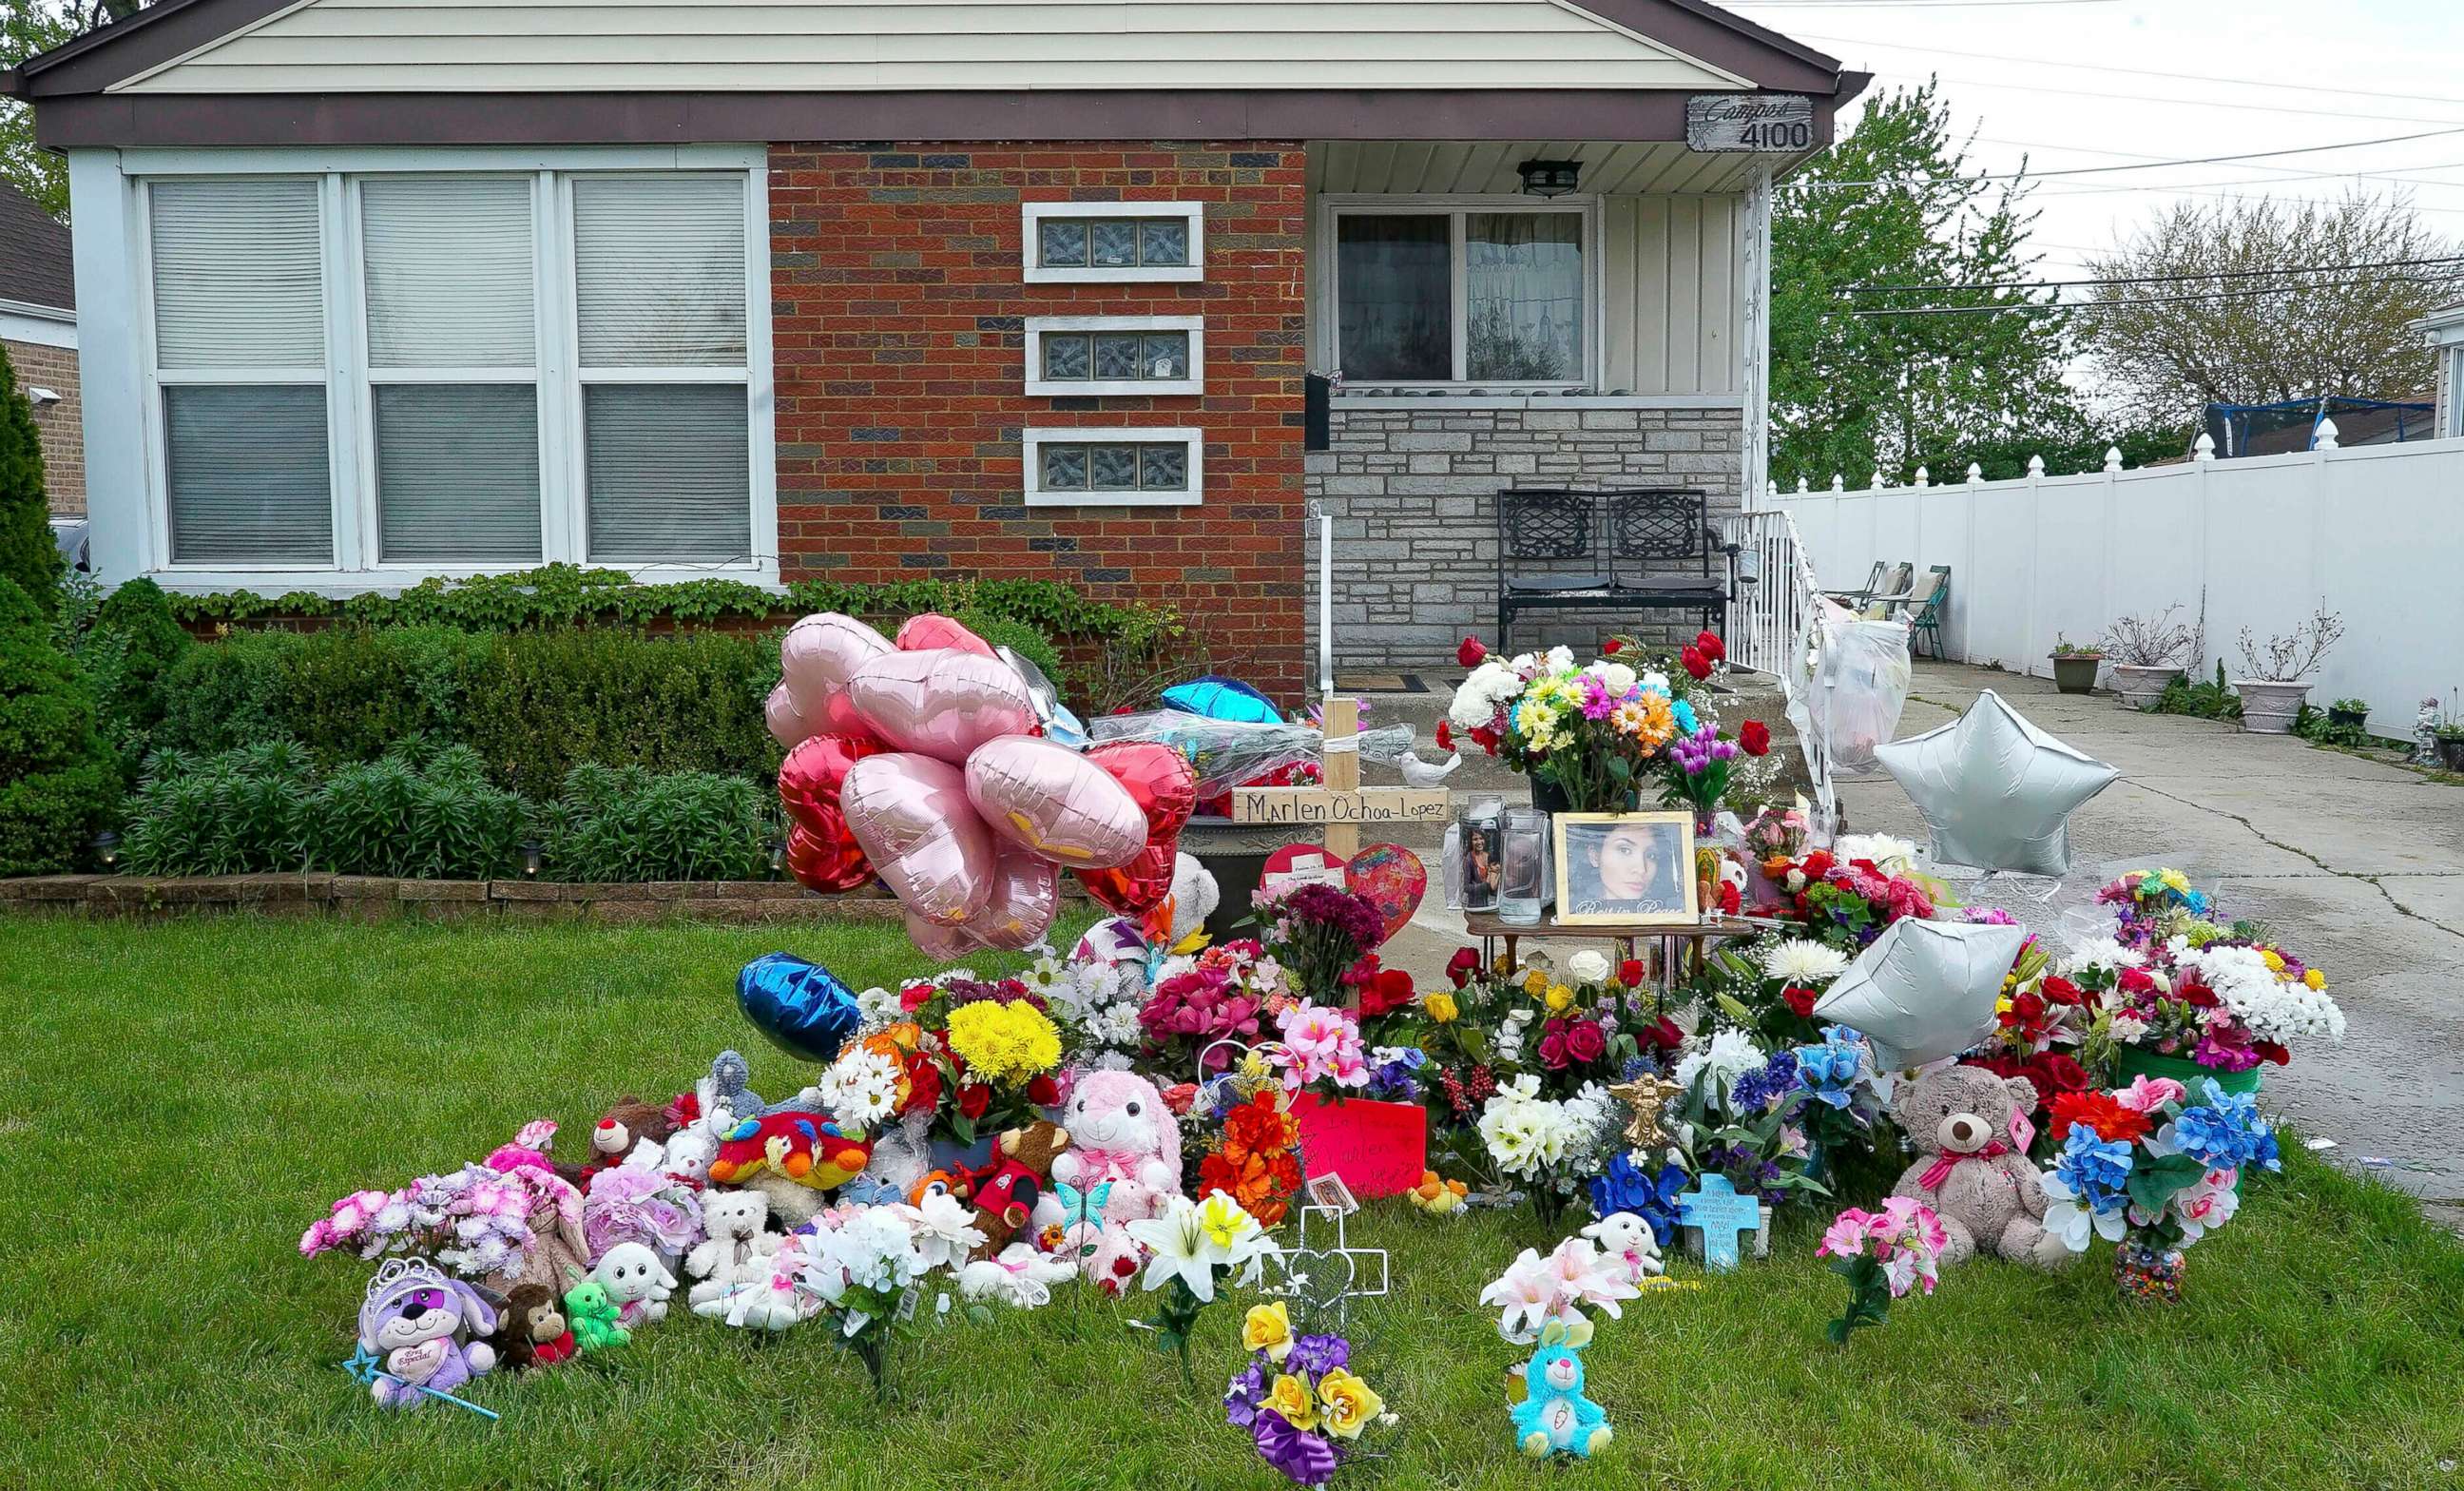 PHOTO: A makeshift memorial for victim Marlen Ochoa-Lopez covers the lawn outside the home where she was murdered in Chicago, May 17, 2019.